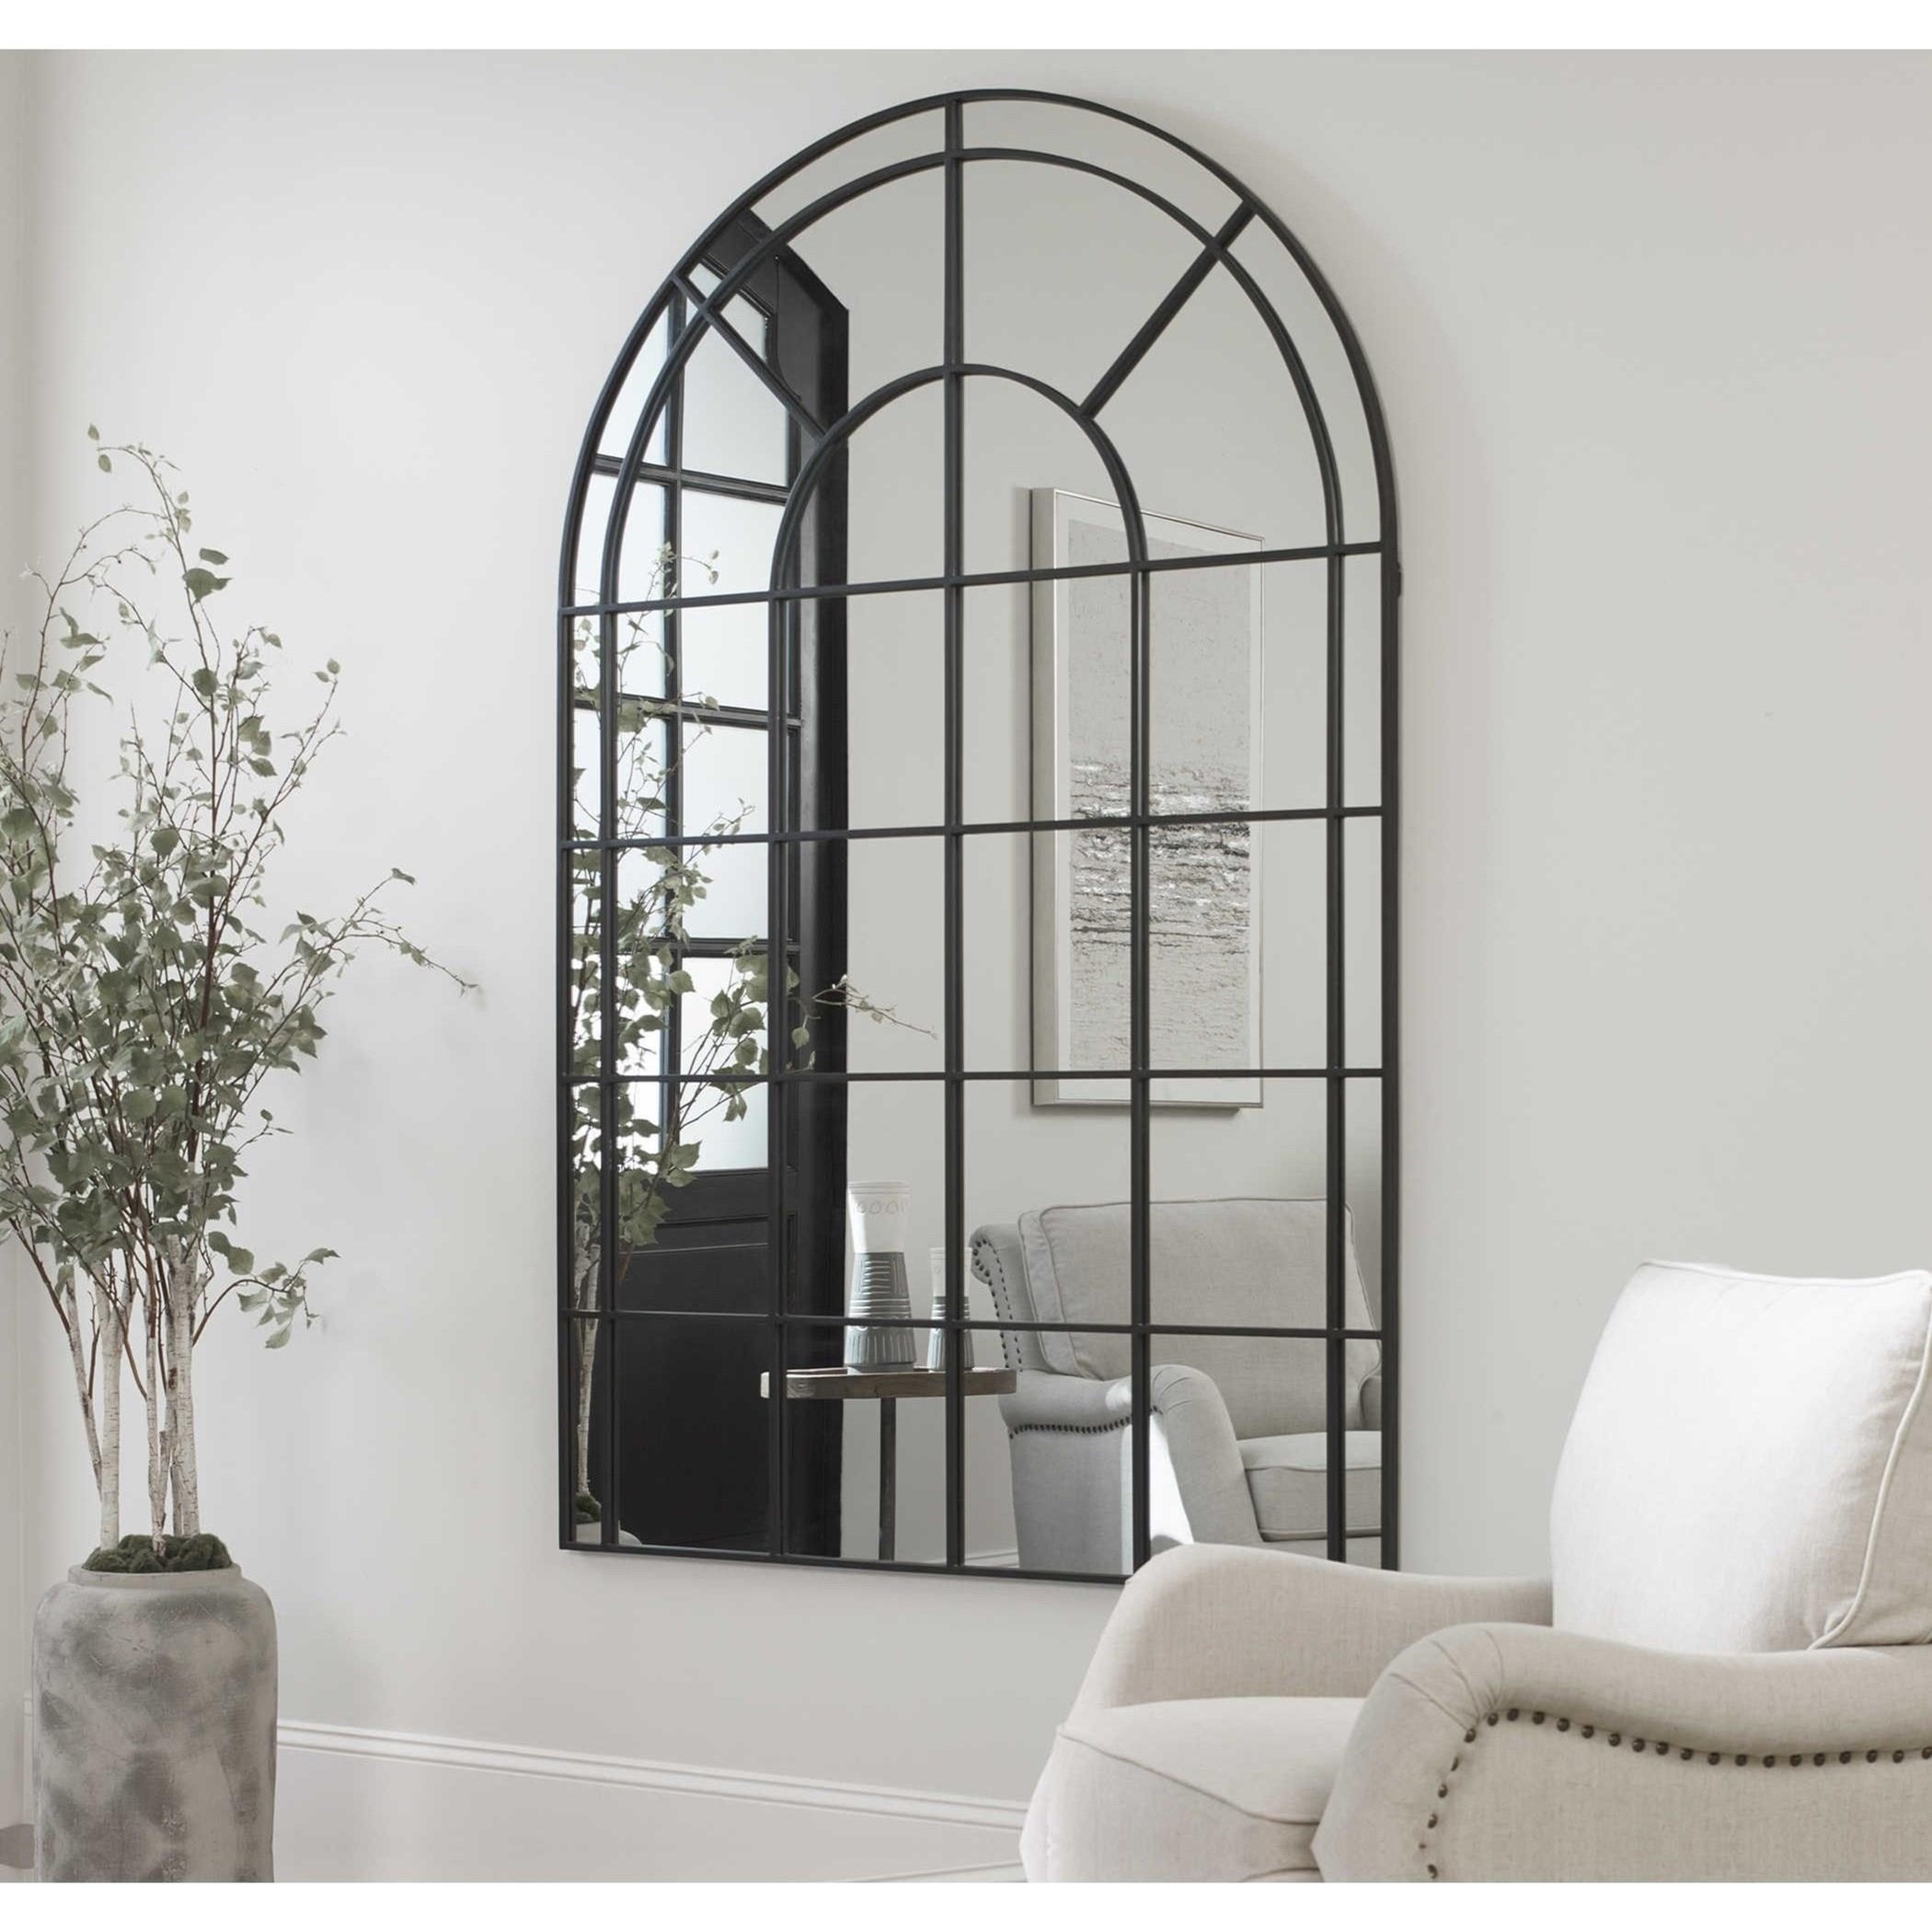 Uttermost Arched Mirrors Grantola Black Arch Iron Mirror Adcock Furniture  Mirrors Wall